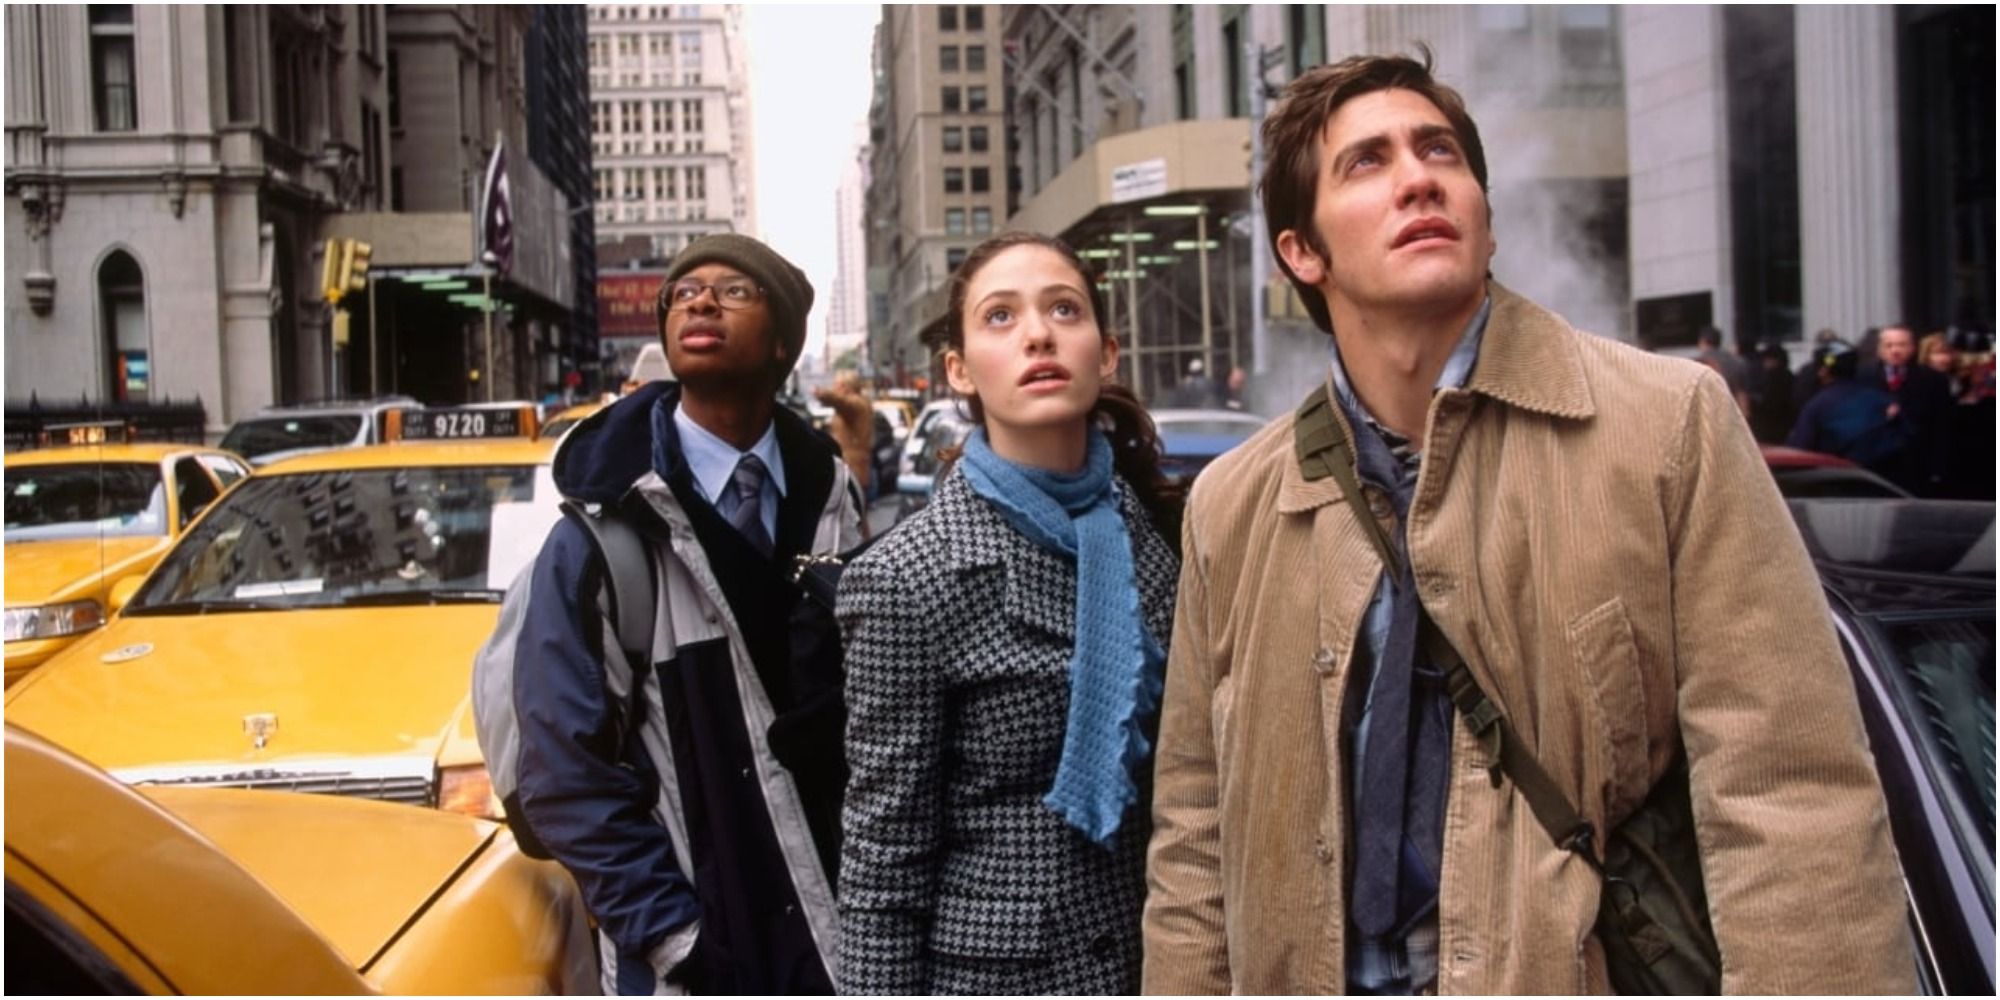 Jake Gyllenhaal as Sam Hall and company in The Day After Tomorrow